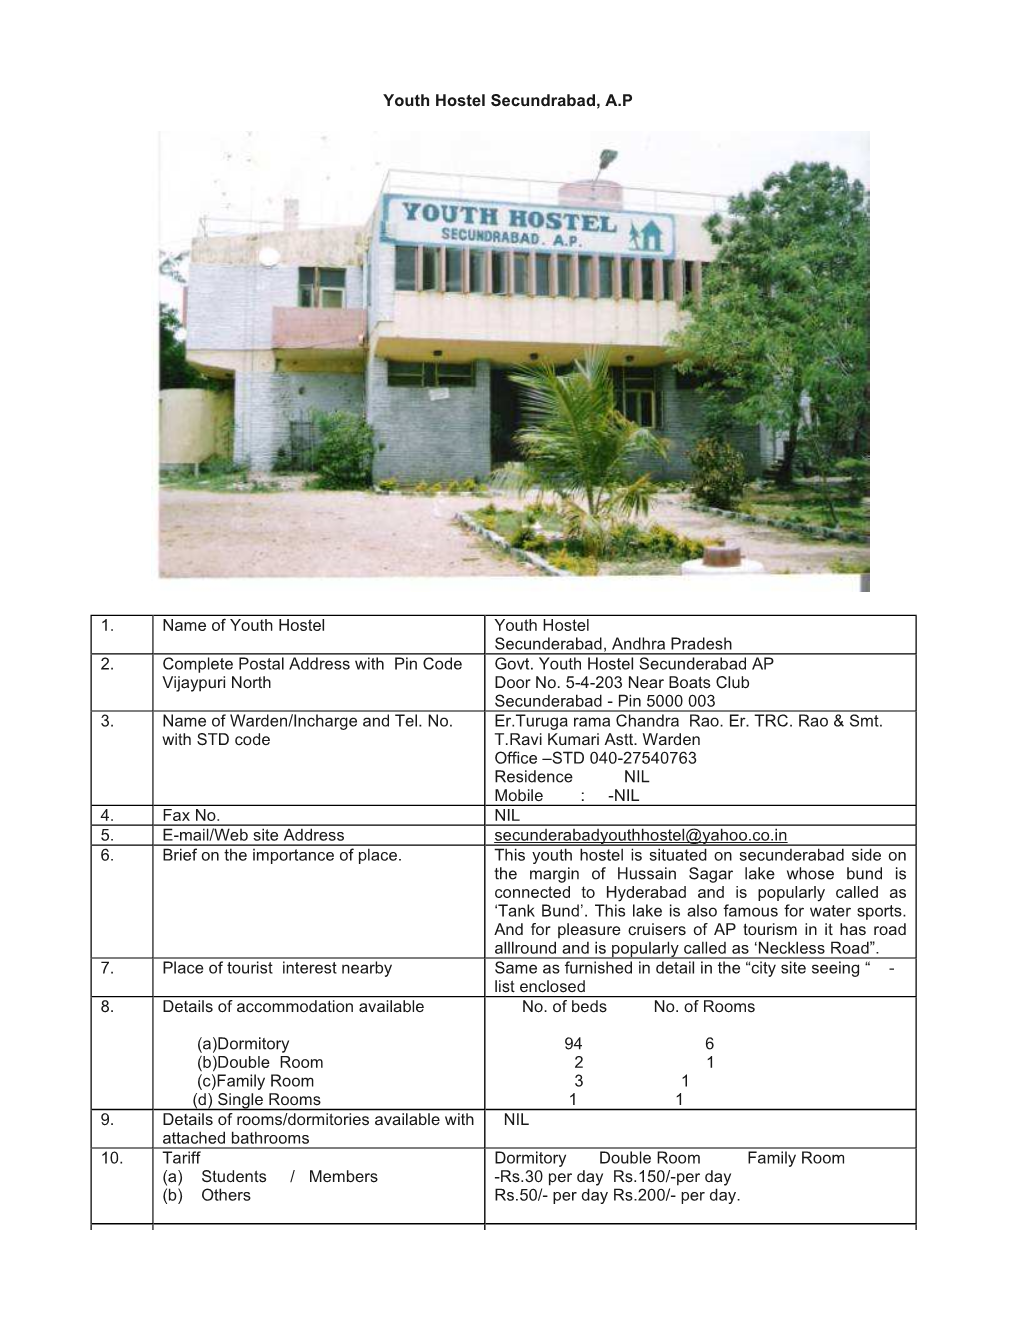 Youth Hostel Secundrabad, A.P 1. Name of Youth Hostel Youth Hostel